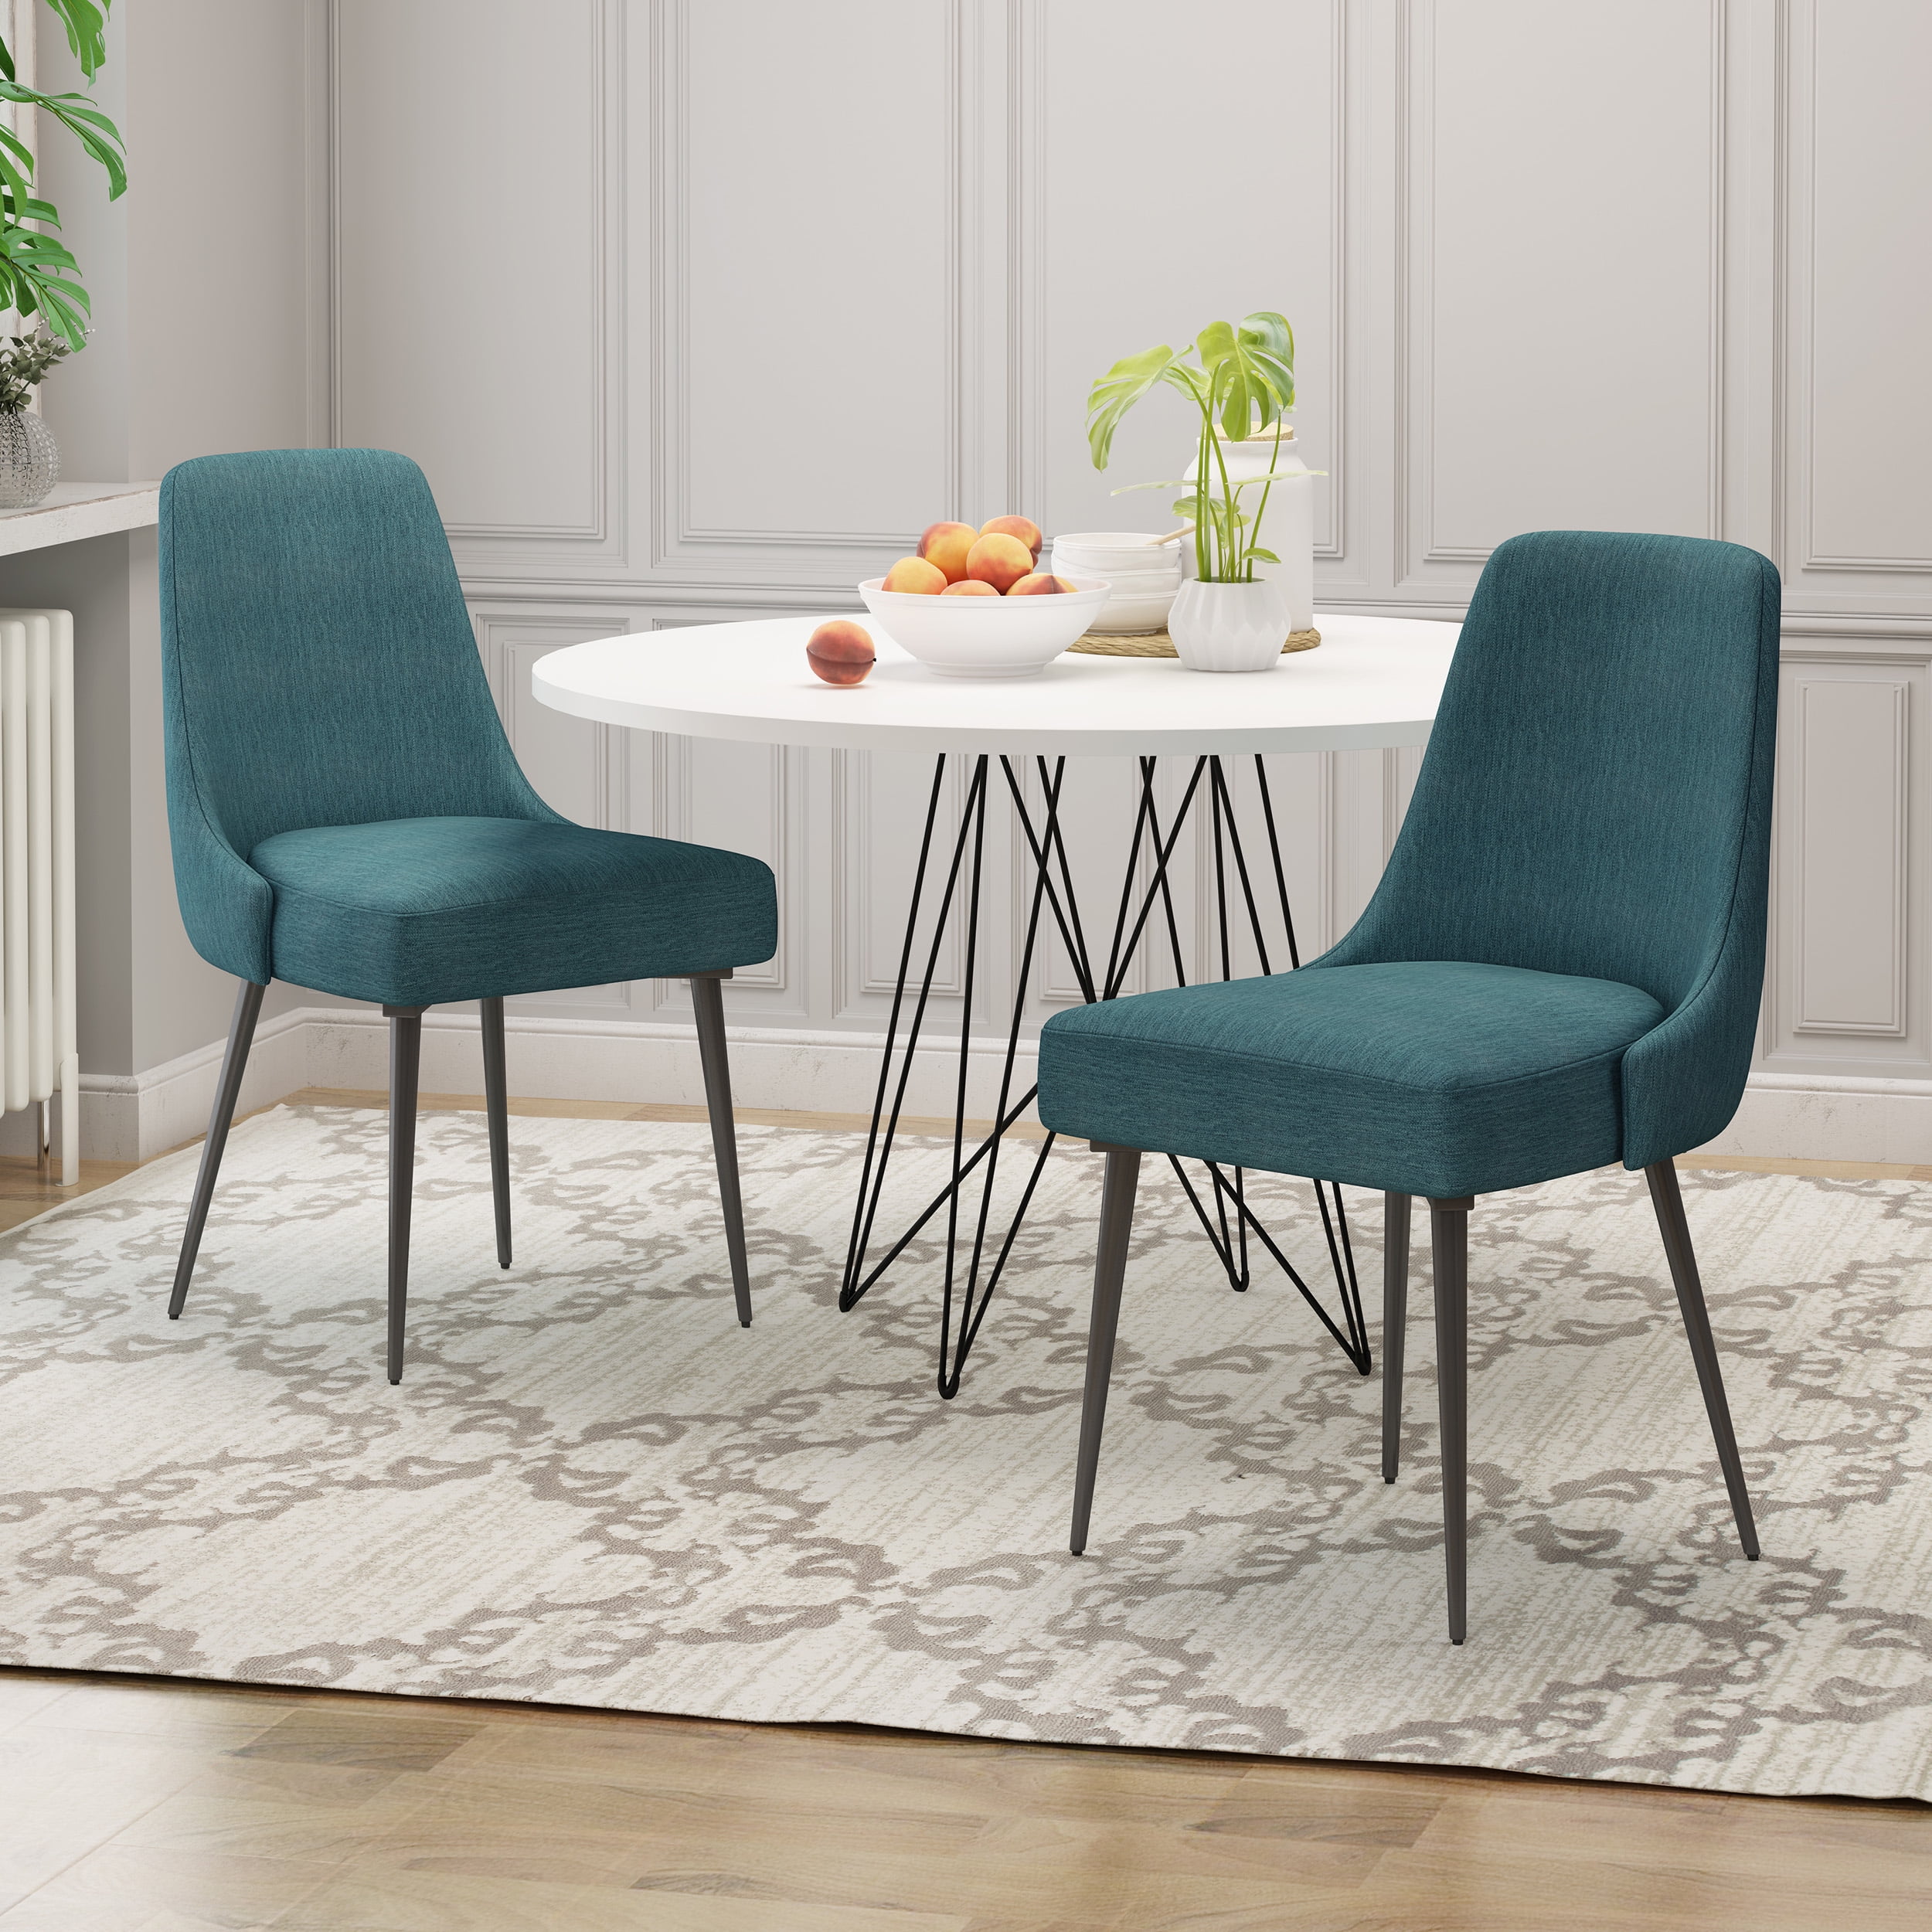 Modway Viscount Mid-Century Modern Upholstered Fabric Two Kitchen and Dining Room Chairs in Teal